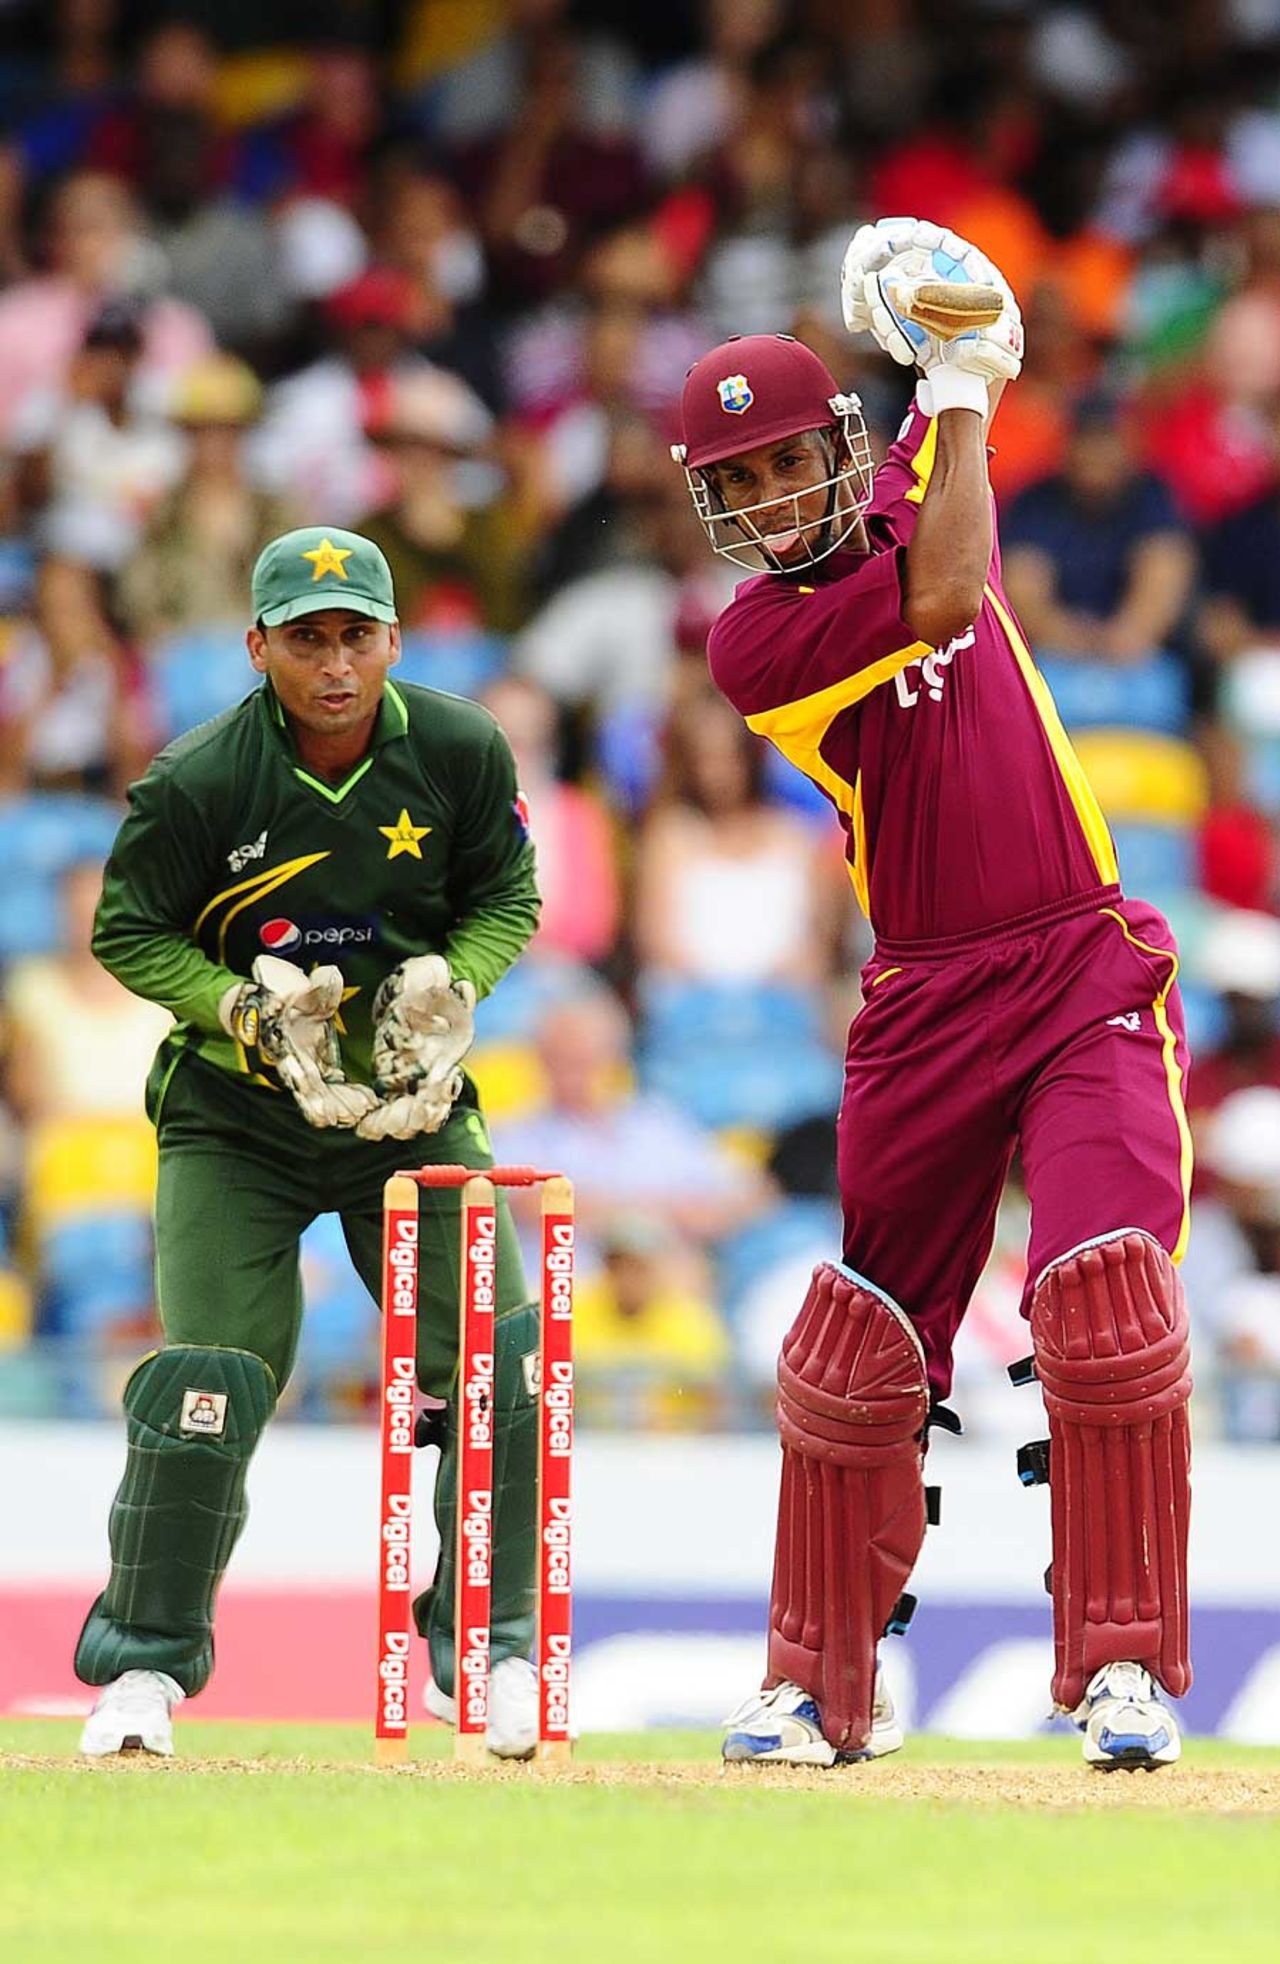 Lendl Simmons punches into the off side, West Indies v Pakistan, 3rd ODI, Barbados, April 28, 2011